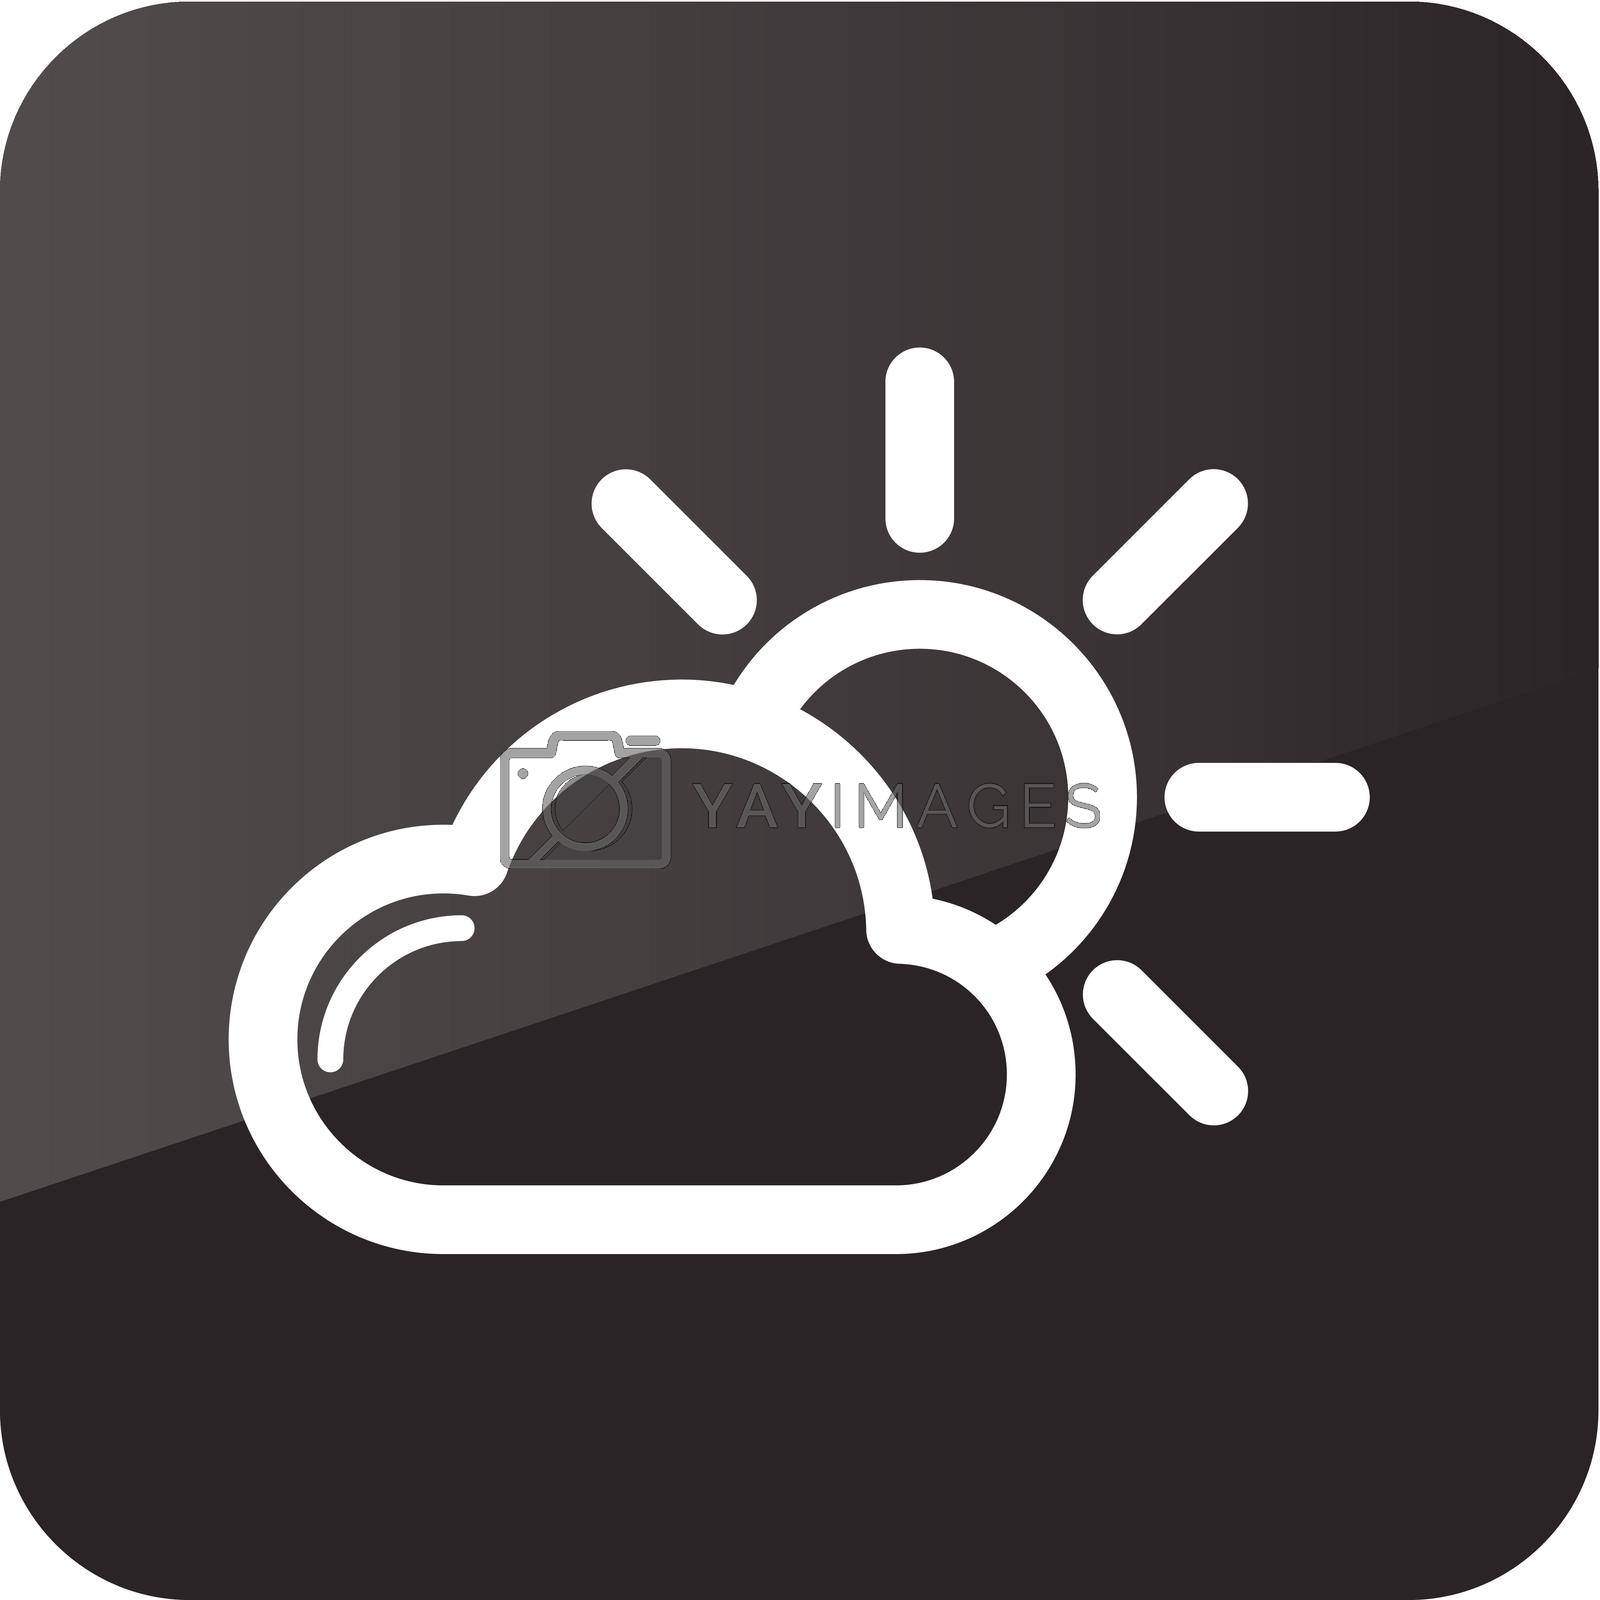 Sun and Cloud outline icon. Meteorology. Weather. Vector illustration eps 10